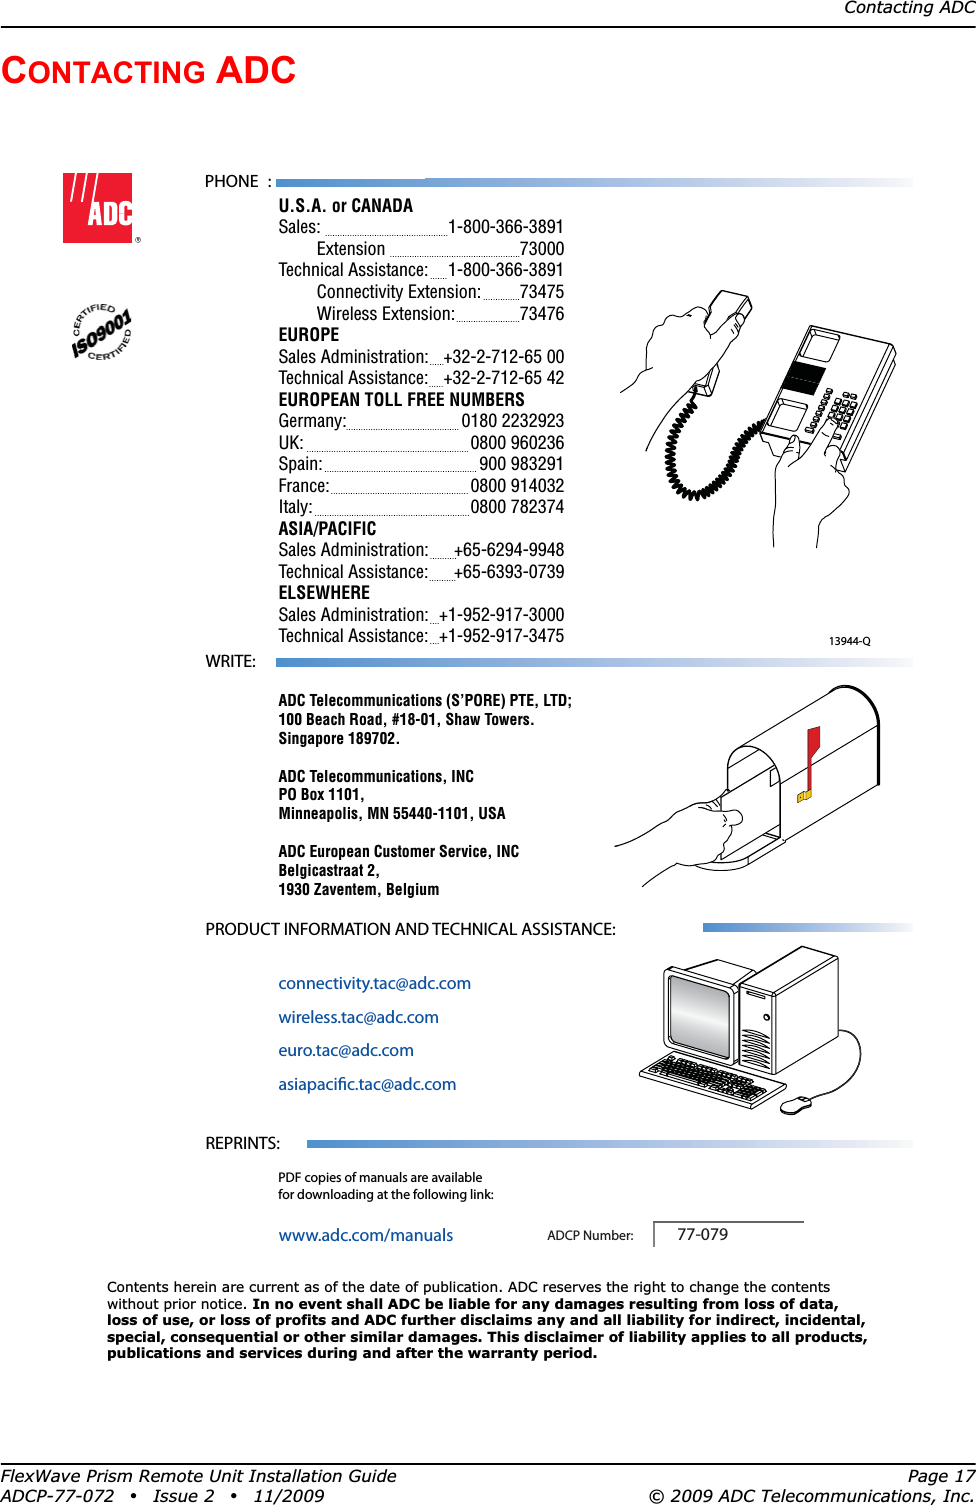 Contacting ADCFlexWave Prism Remote Unit Installation Guide Page 17ADCP-77-072 • Issue 2 • 11/2009 © 2009 ADC Telecommunications, Inc.CONTACTING ADC13944-QContents herein are current as of the date of publication. ADC reserves the right to change the contentswithout prior notice. In no event shall ADC be liable for any damages resulting from loss of data,loss of use, or loss of profits and ADC further disclaims any and all liability for indirect, incidental,special, consequential or other similar damages. This disclaimer of liability applies to all products,publications and services during and after the warranty period.REPRINTS:www.adc.com/manualsPDF copies of manuals are availablefor downloading at the following link:PRODUCT INFORMATION AND TECHNICAL ASSISTANCE:connectivity.tac@adc.comwireless.tac@adc.comeuro.tac@adc.comasiapacic.tac@adc.comADCP Number:WRITE:ADC Telecommunications (S’PORE) PTE, LTD;100 Beach Road, #18-01, Shaw Towers.Singapore 189702.ADC Telecommunications, INCPO Box 1101,Minneapolis, MN 55440-1101, USAADC European Customer Service, INCBelgicastraat 2,1930 Zaventem, Belgium77-079PHONE :U.S.A. or CANADASales:     1-800-366-3891 Extension   73000Technical Assistance:  1-800-366-3891 Connectivity Extension: 73475 Wireless Extension:  73476EUROPESales Administration:  +32-2-712-65 00Technical Assistance:  +32-2-712-65 42EUROPEAN TOLL FREE NUMBERSGermany:   0180 2232923UK:     0800 960236Spain:   900 983291France:   0800 914032Italy:     0800 782374ASIA/PACIFICSales Administration:  +65-6294-9948Technical Assistance:  +65-6393-0739ELSEWHERESales Administration:  +1-952-917-3000Technical Assistance:  +1-952-917-3475 